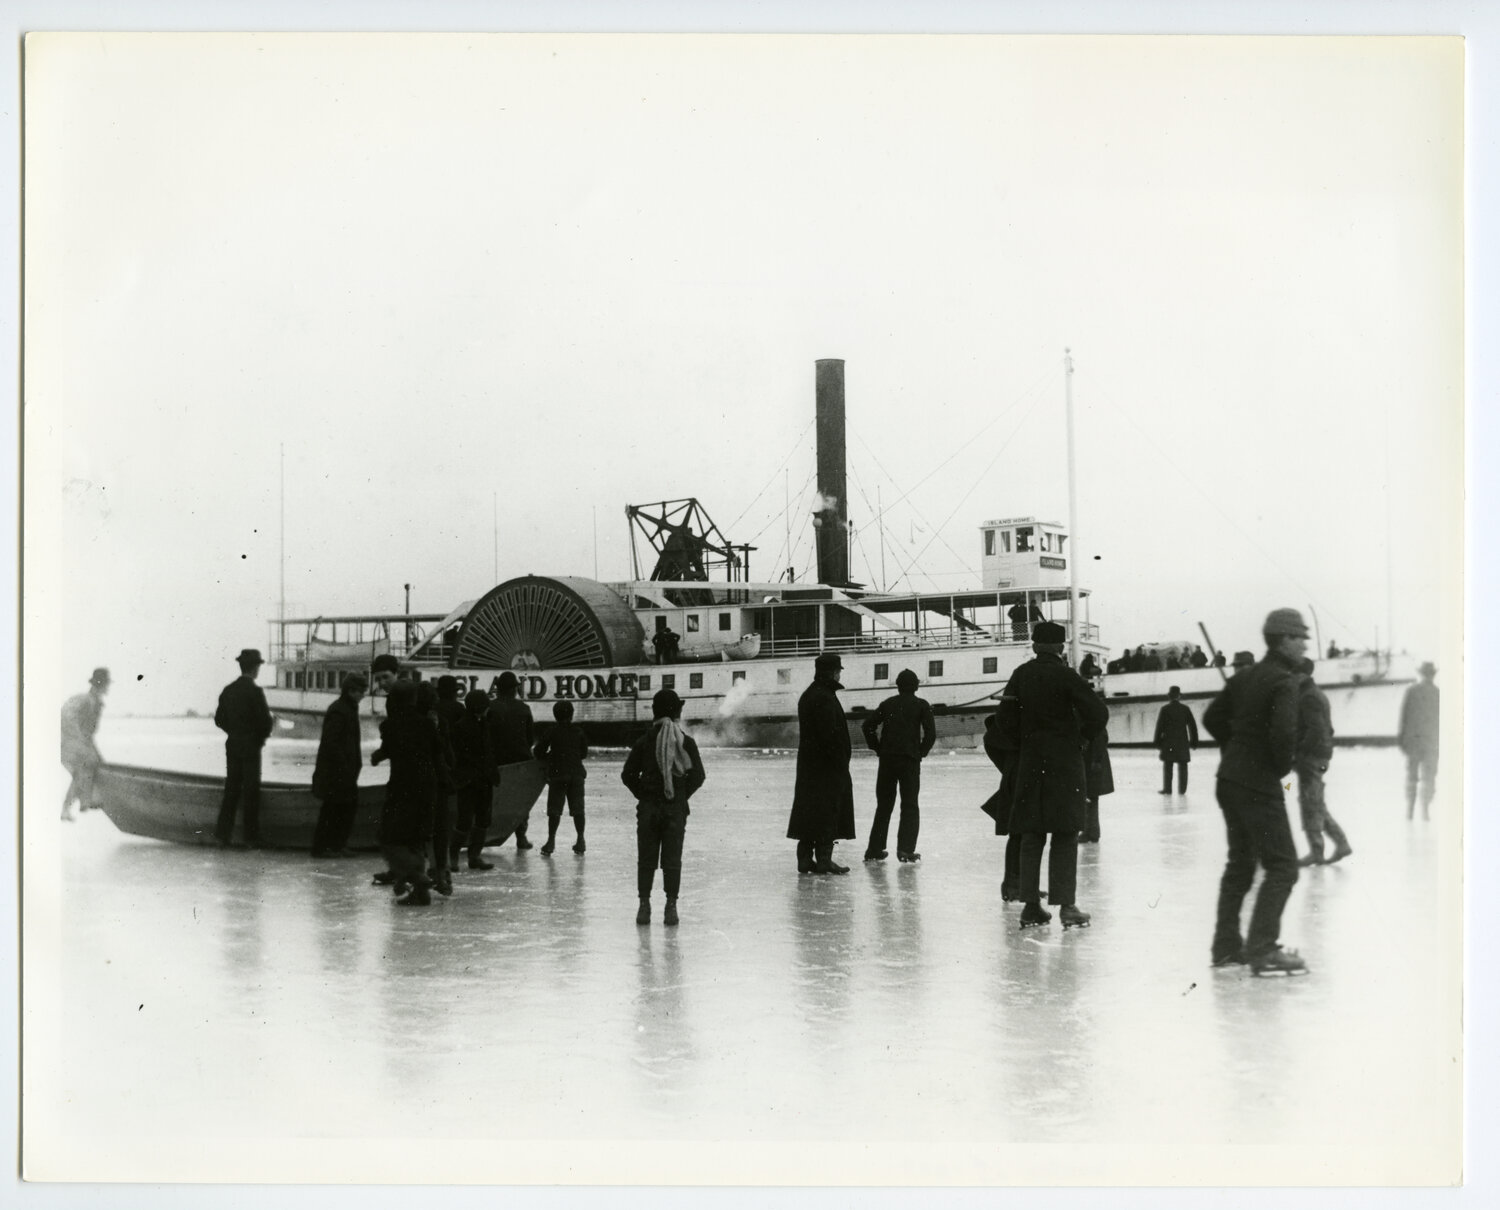 The steamer Island Home during the icy Nantucket winter of 1893.